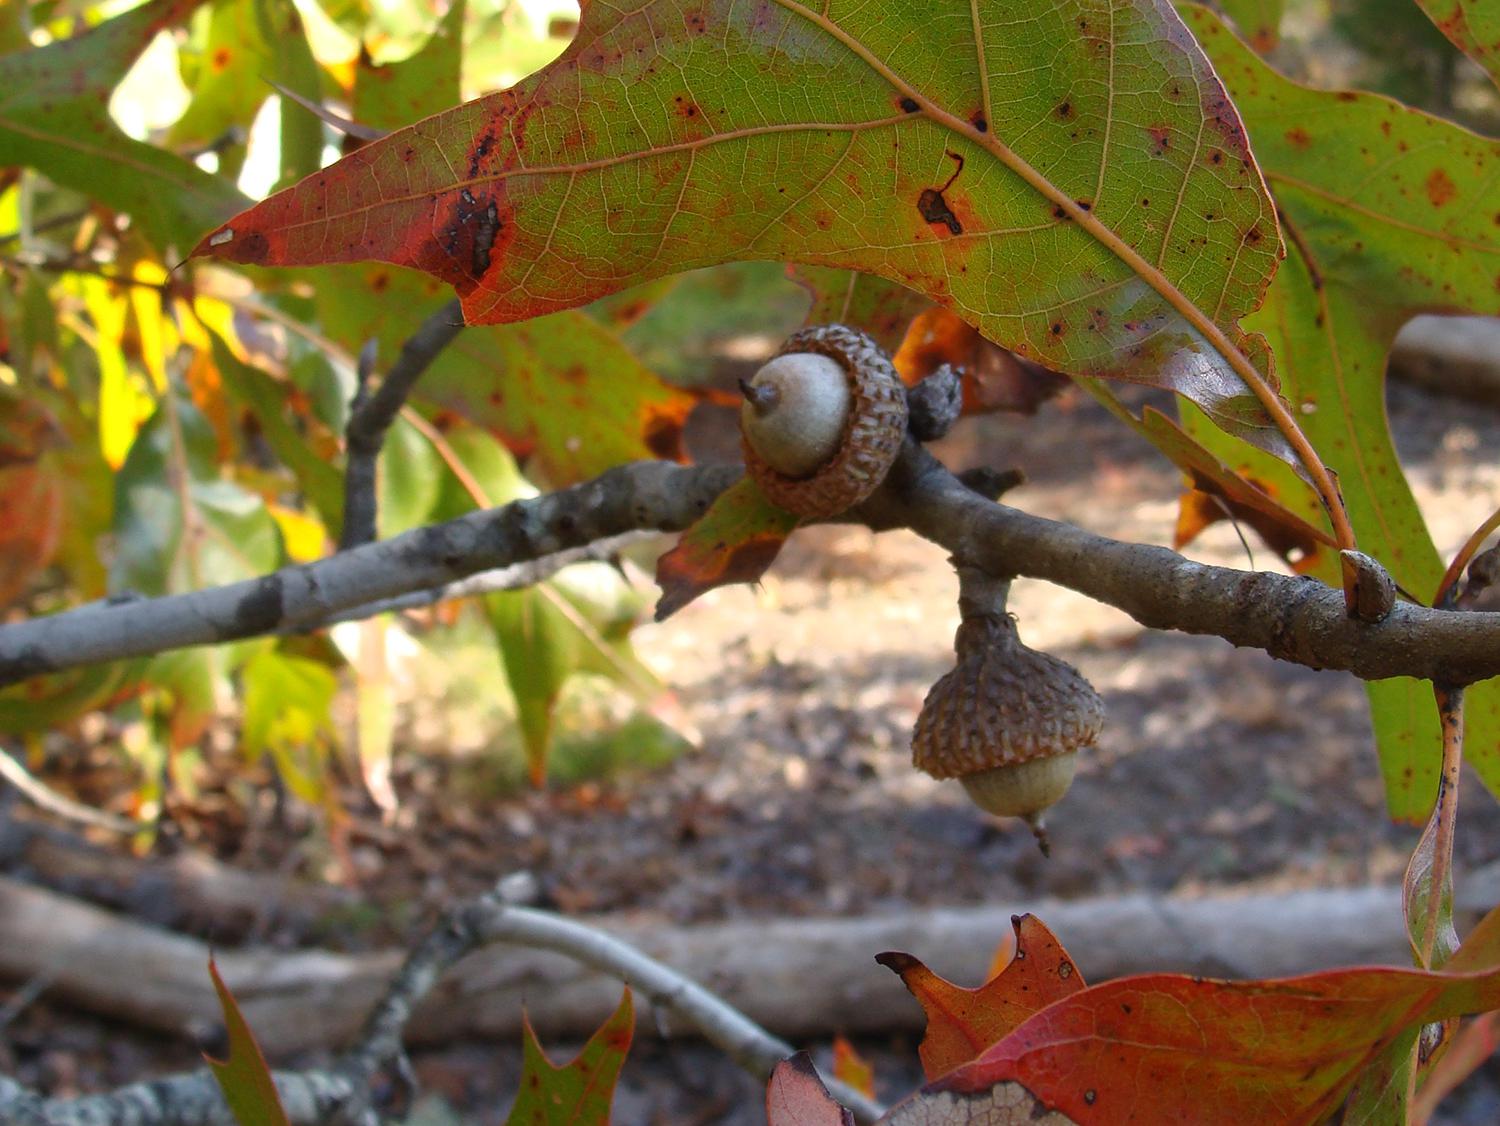 Close up view of a small limb with two acorns and multicolored leaves in a part-sunny, part-shady location.